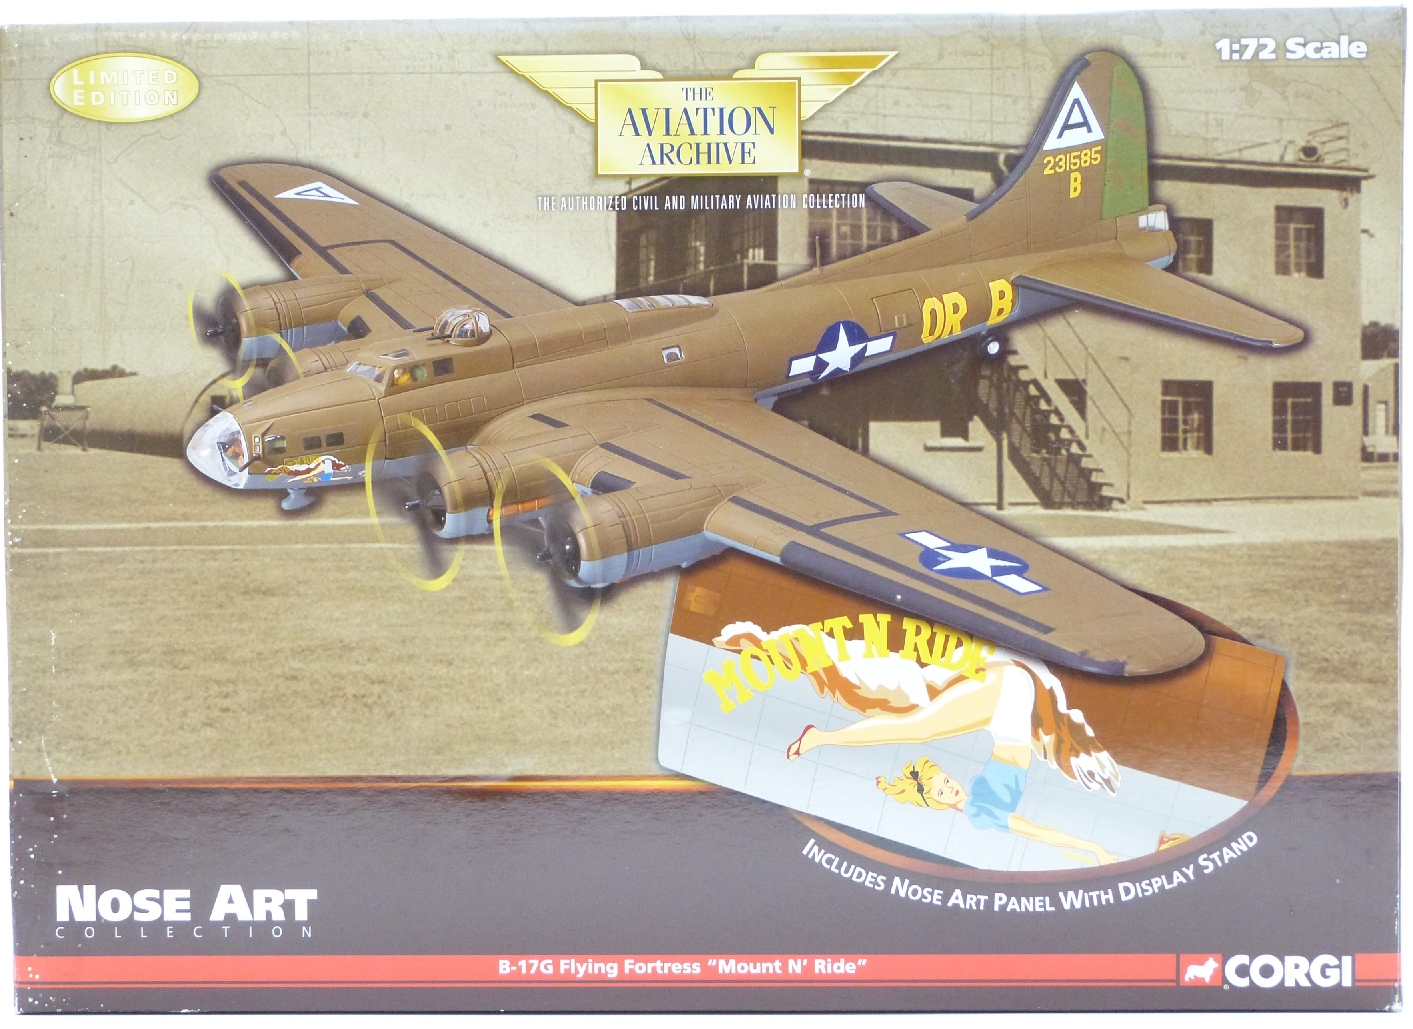 Corgi The Aviation Archive Nose Art Collection 1:72 scale limited edition diecast model B-17G Flying